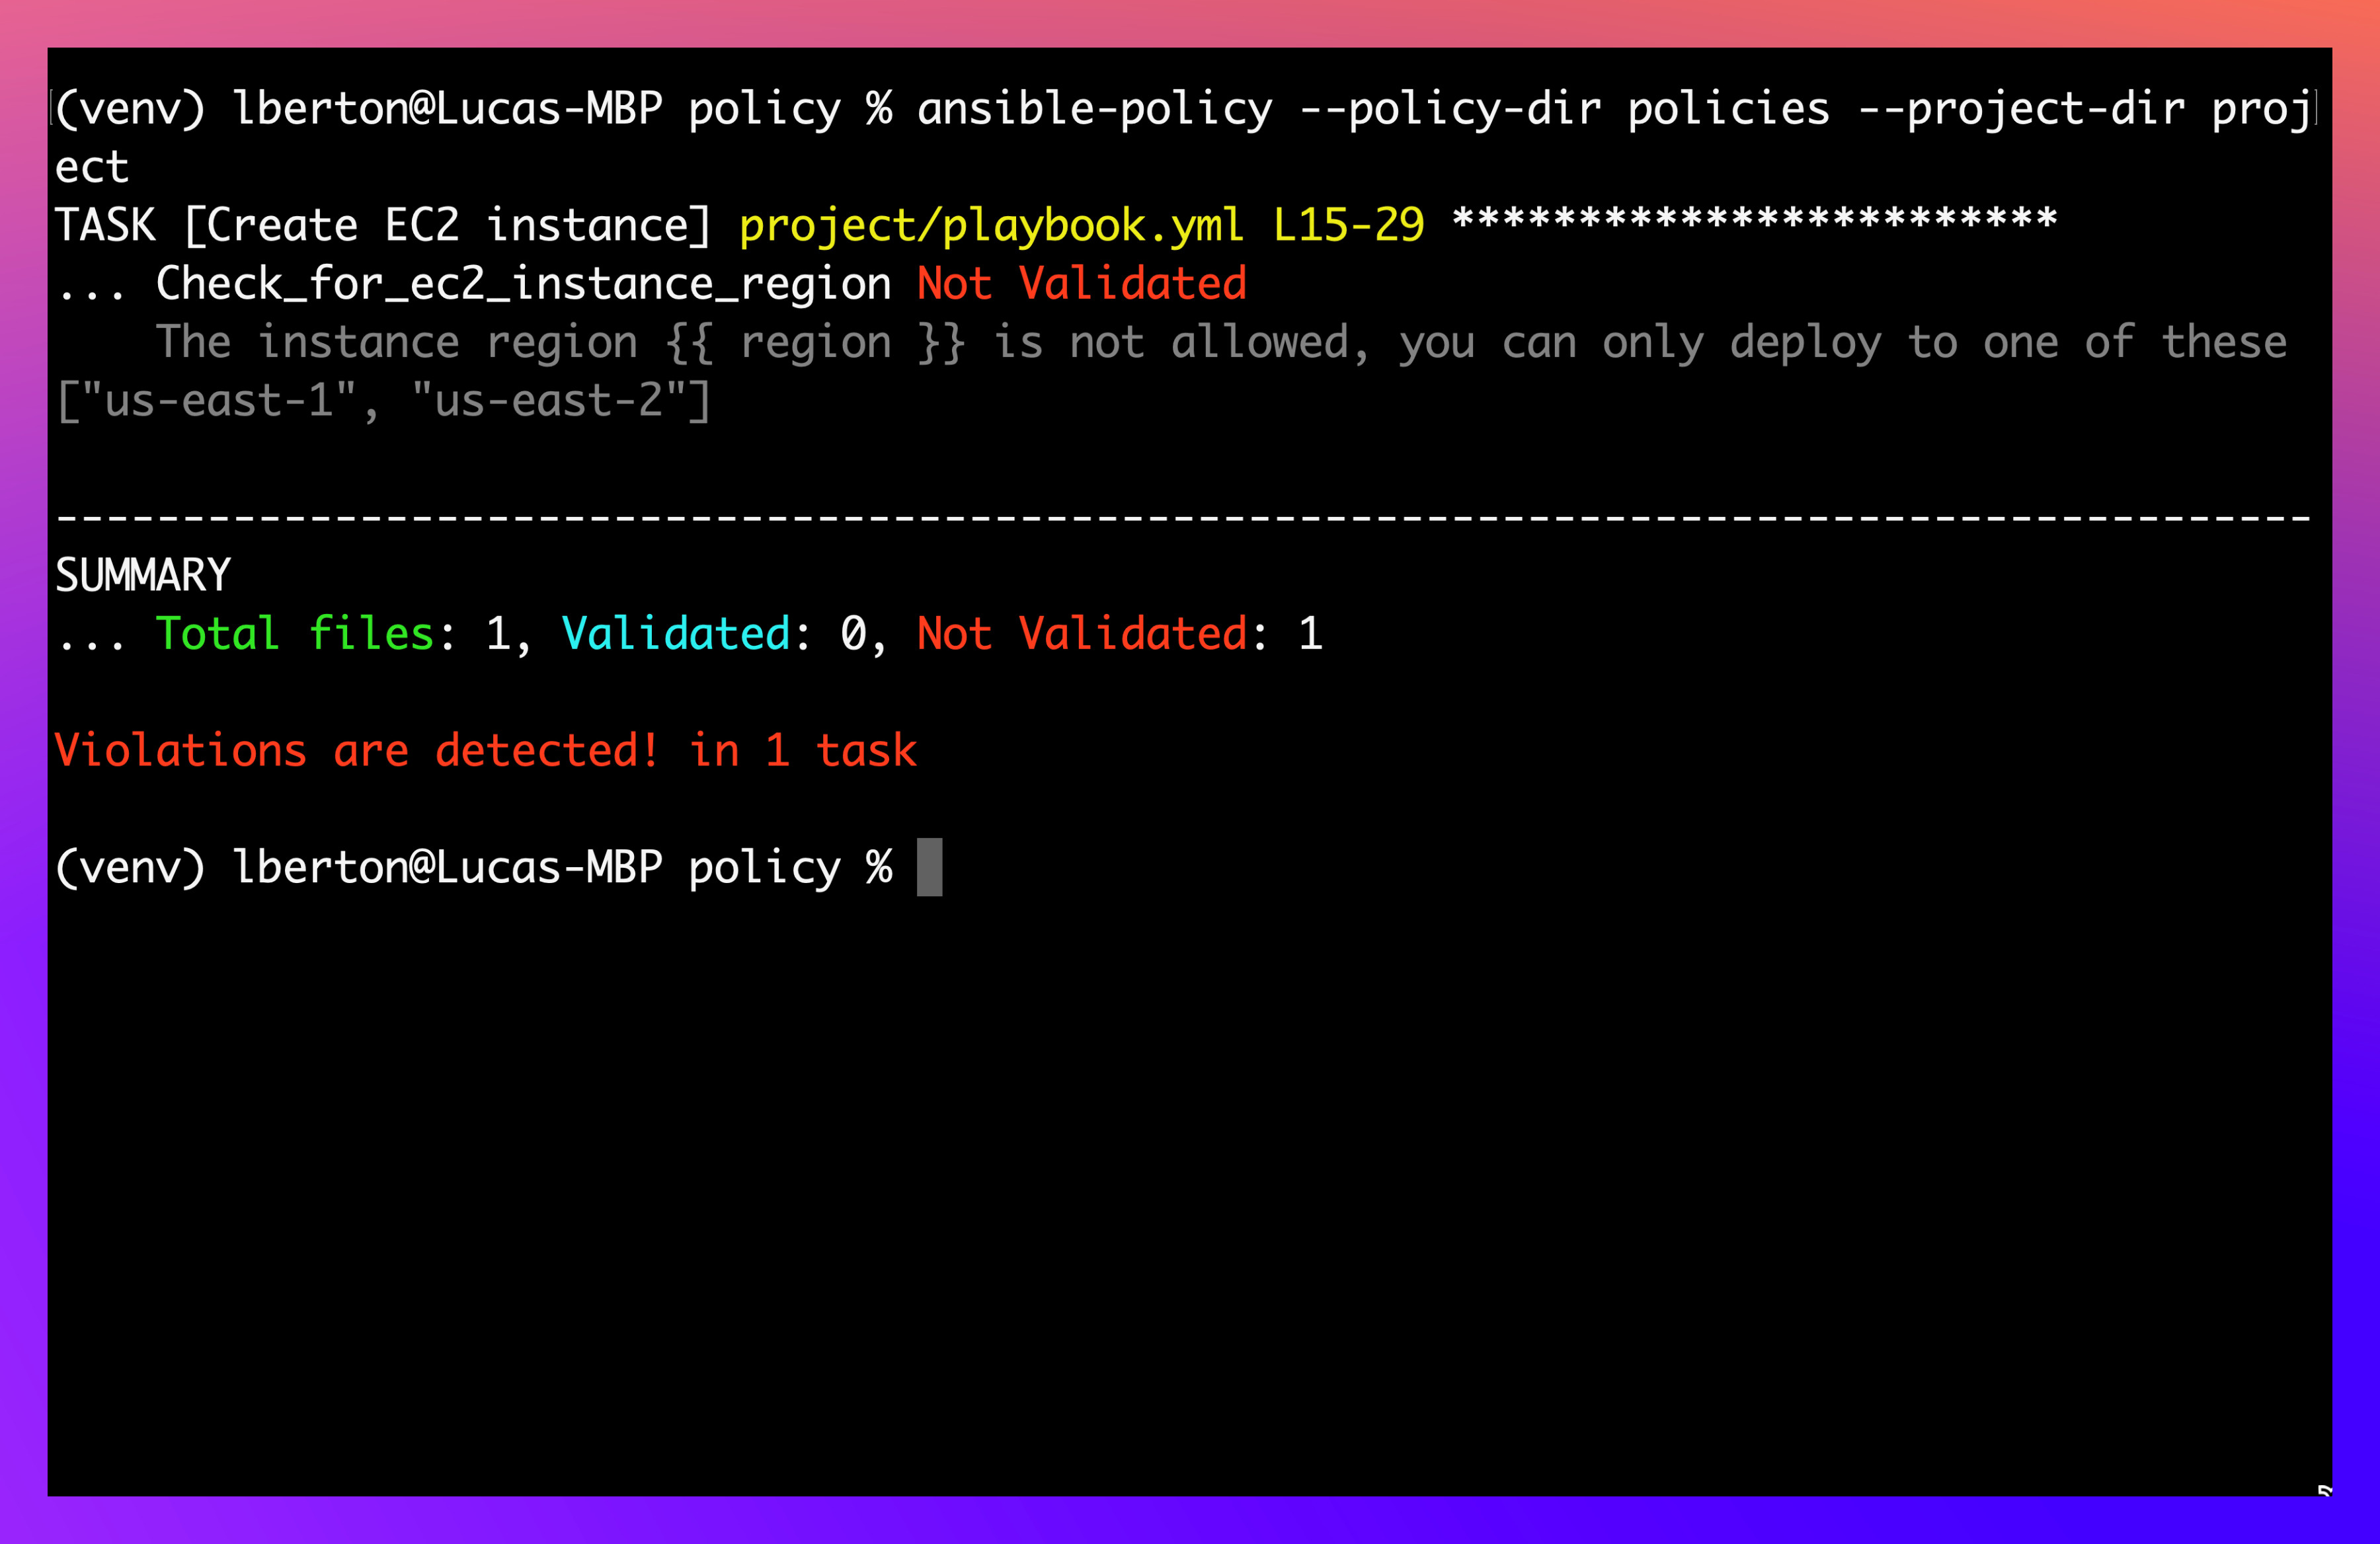 Project Policy Validation with OPA and ansible-policy